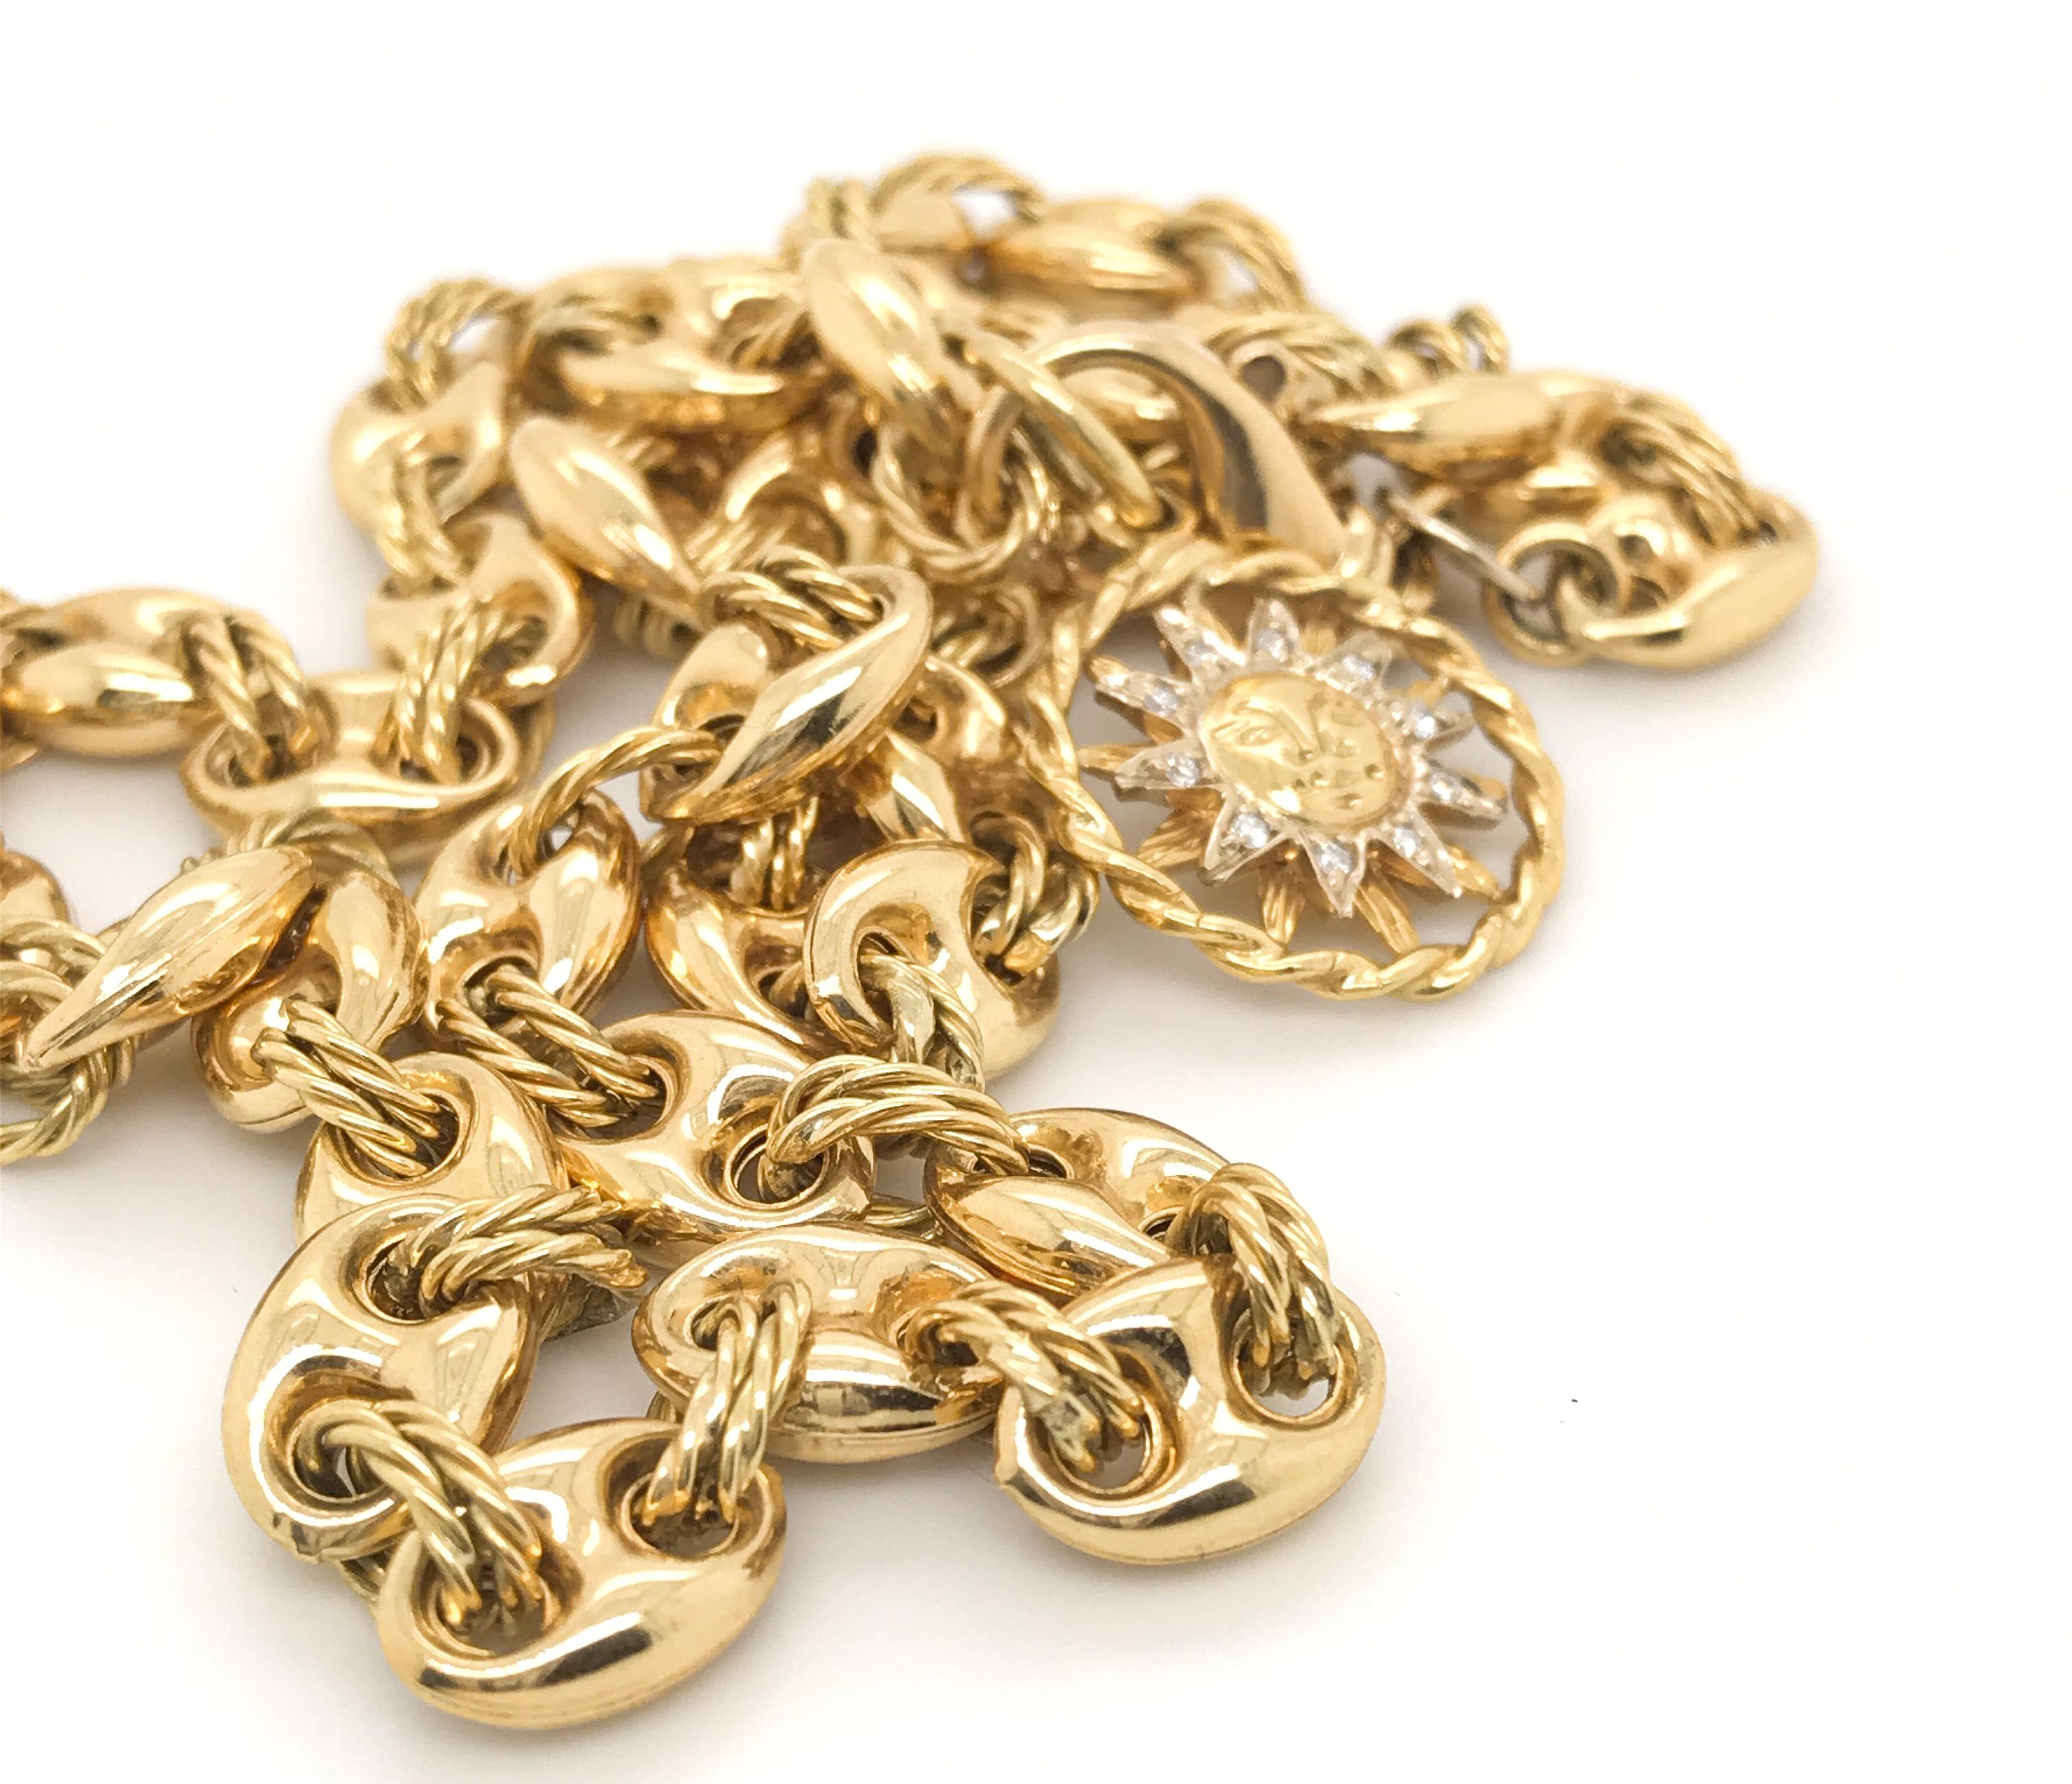 A great chain for everyday wear and this nautical link is so popular. Crafted from 18k yellow gold, the mariner style (Gucci) link is connected together with double twisted rope links which is such a classic look. Nicely detailed and well made, it